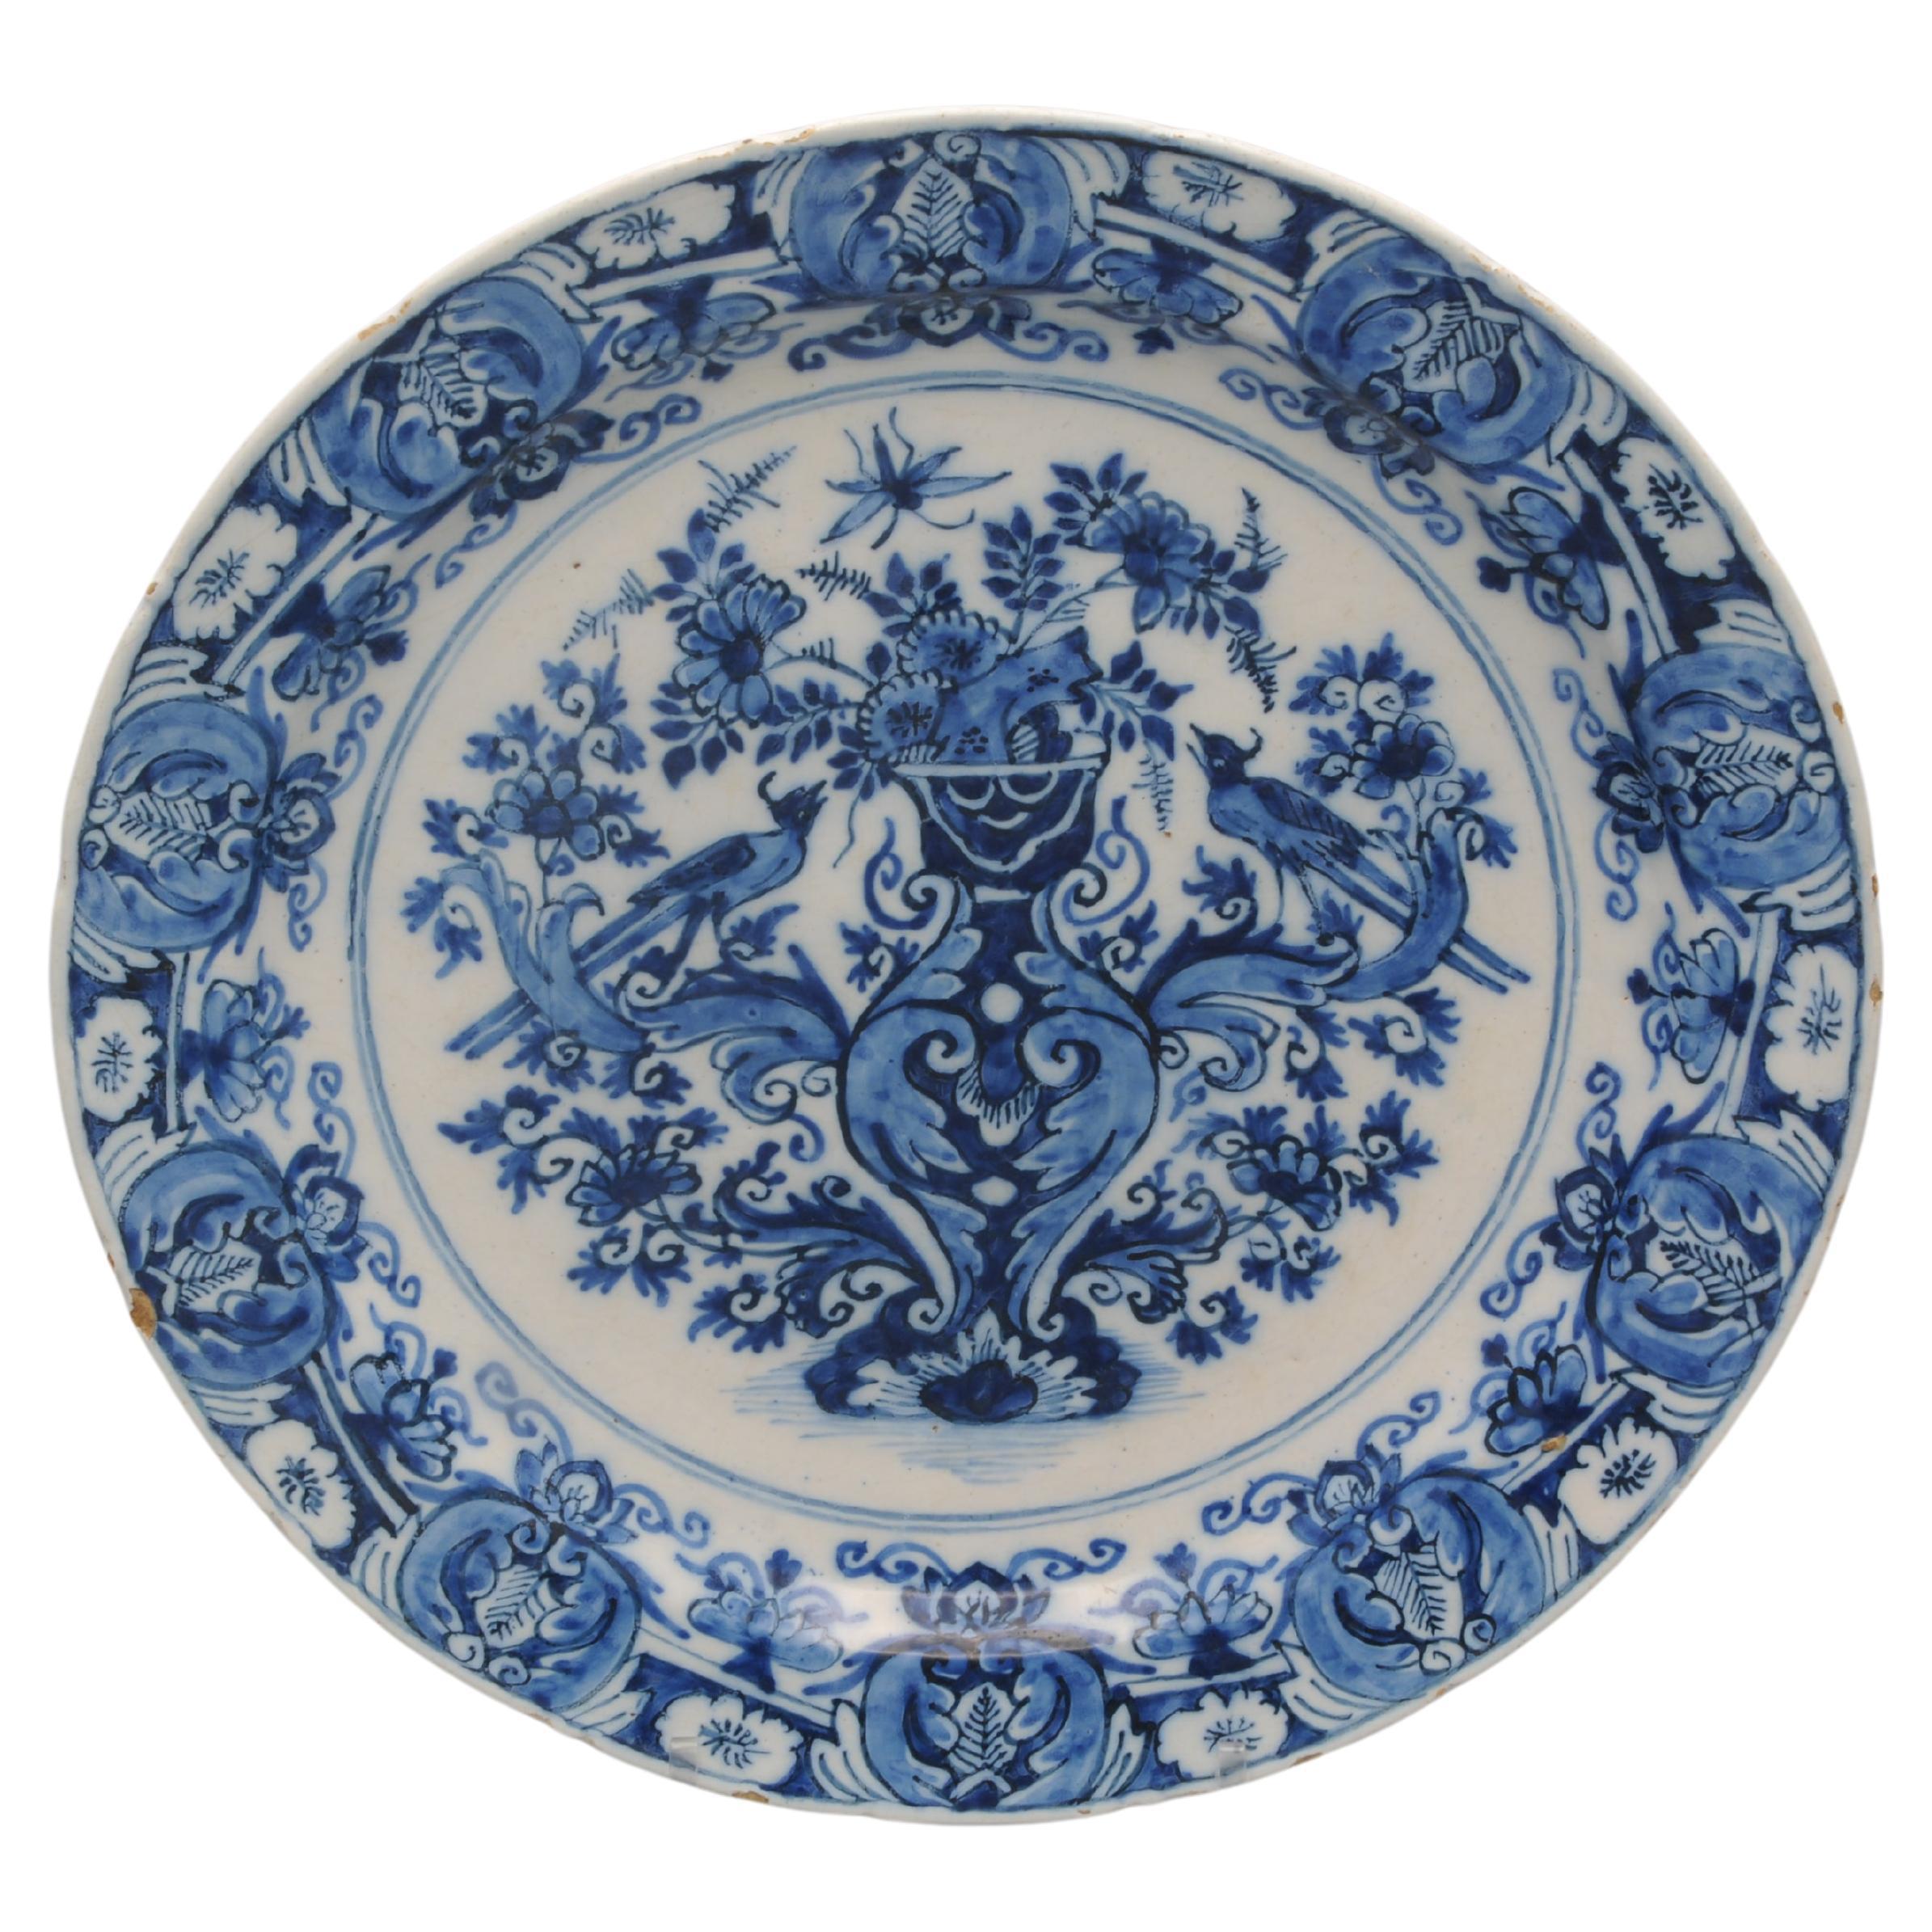 Delft - Louis XIV style plate, first half 18th century For Sale